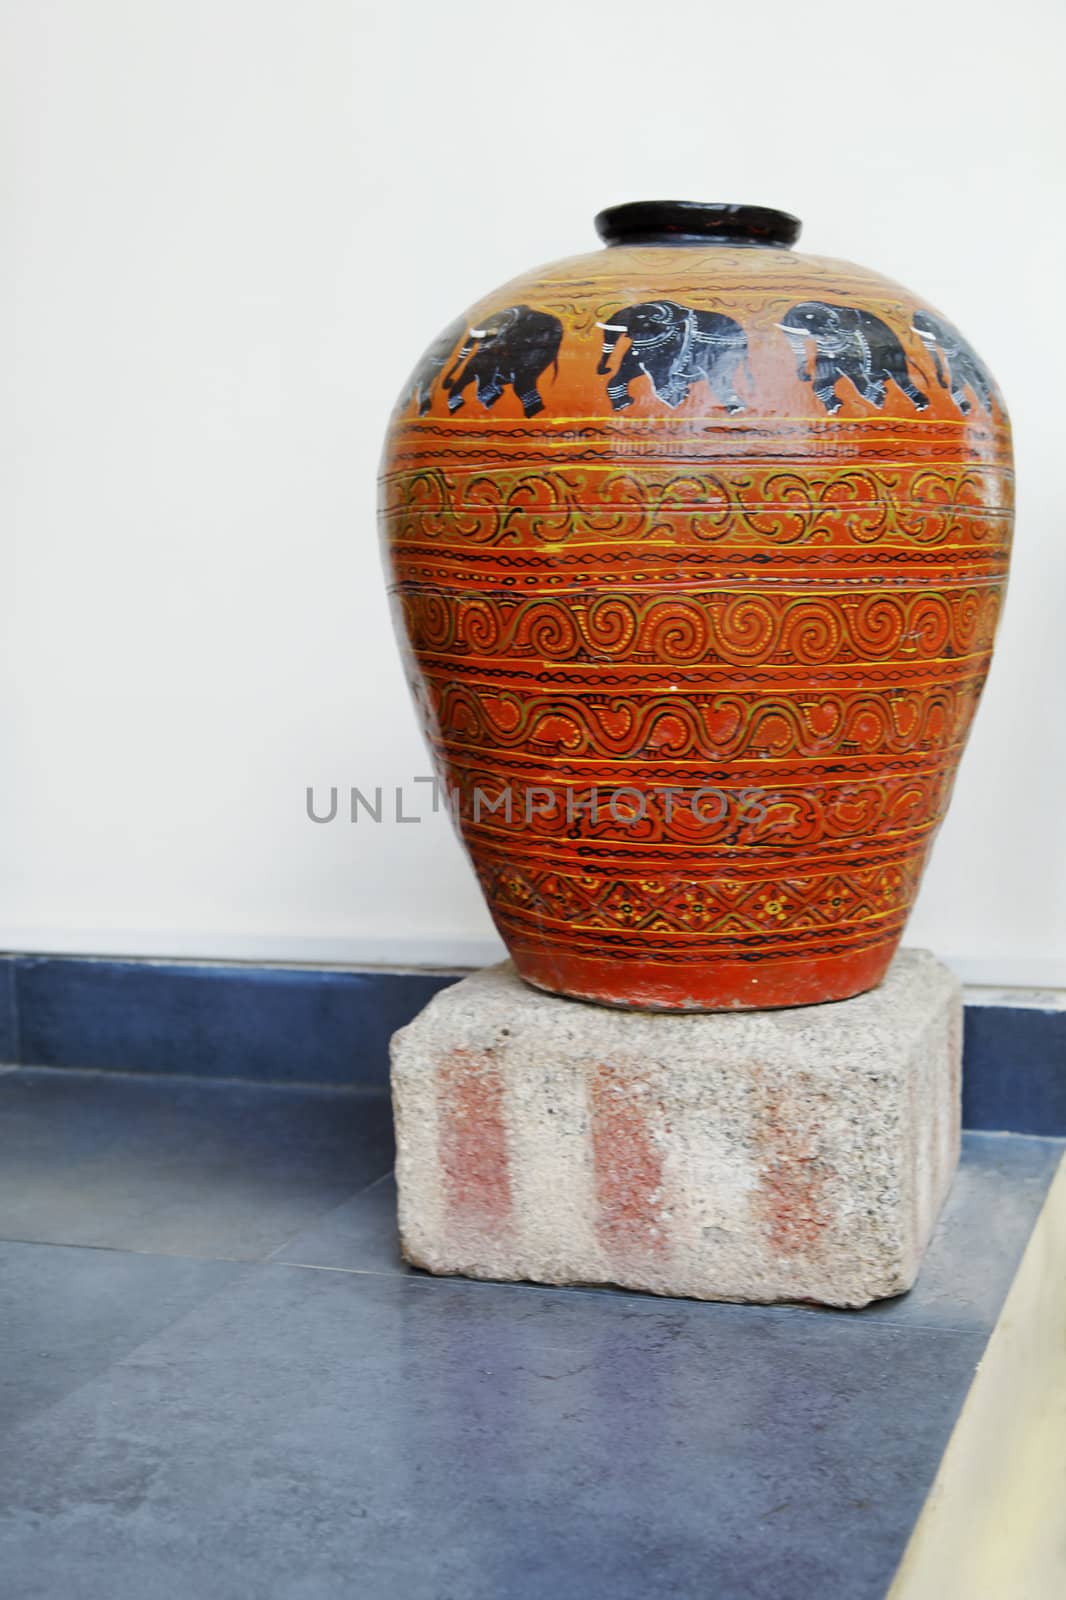 Rajasthan, India, Vertical portrait of a clay terracotta ornate hand painted receptacle made by local cafts paerson